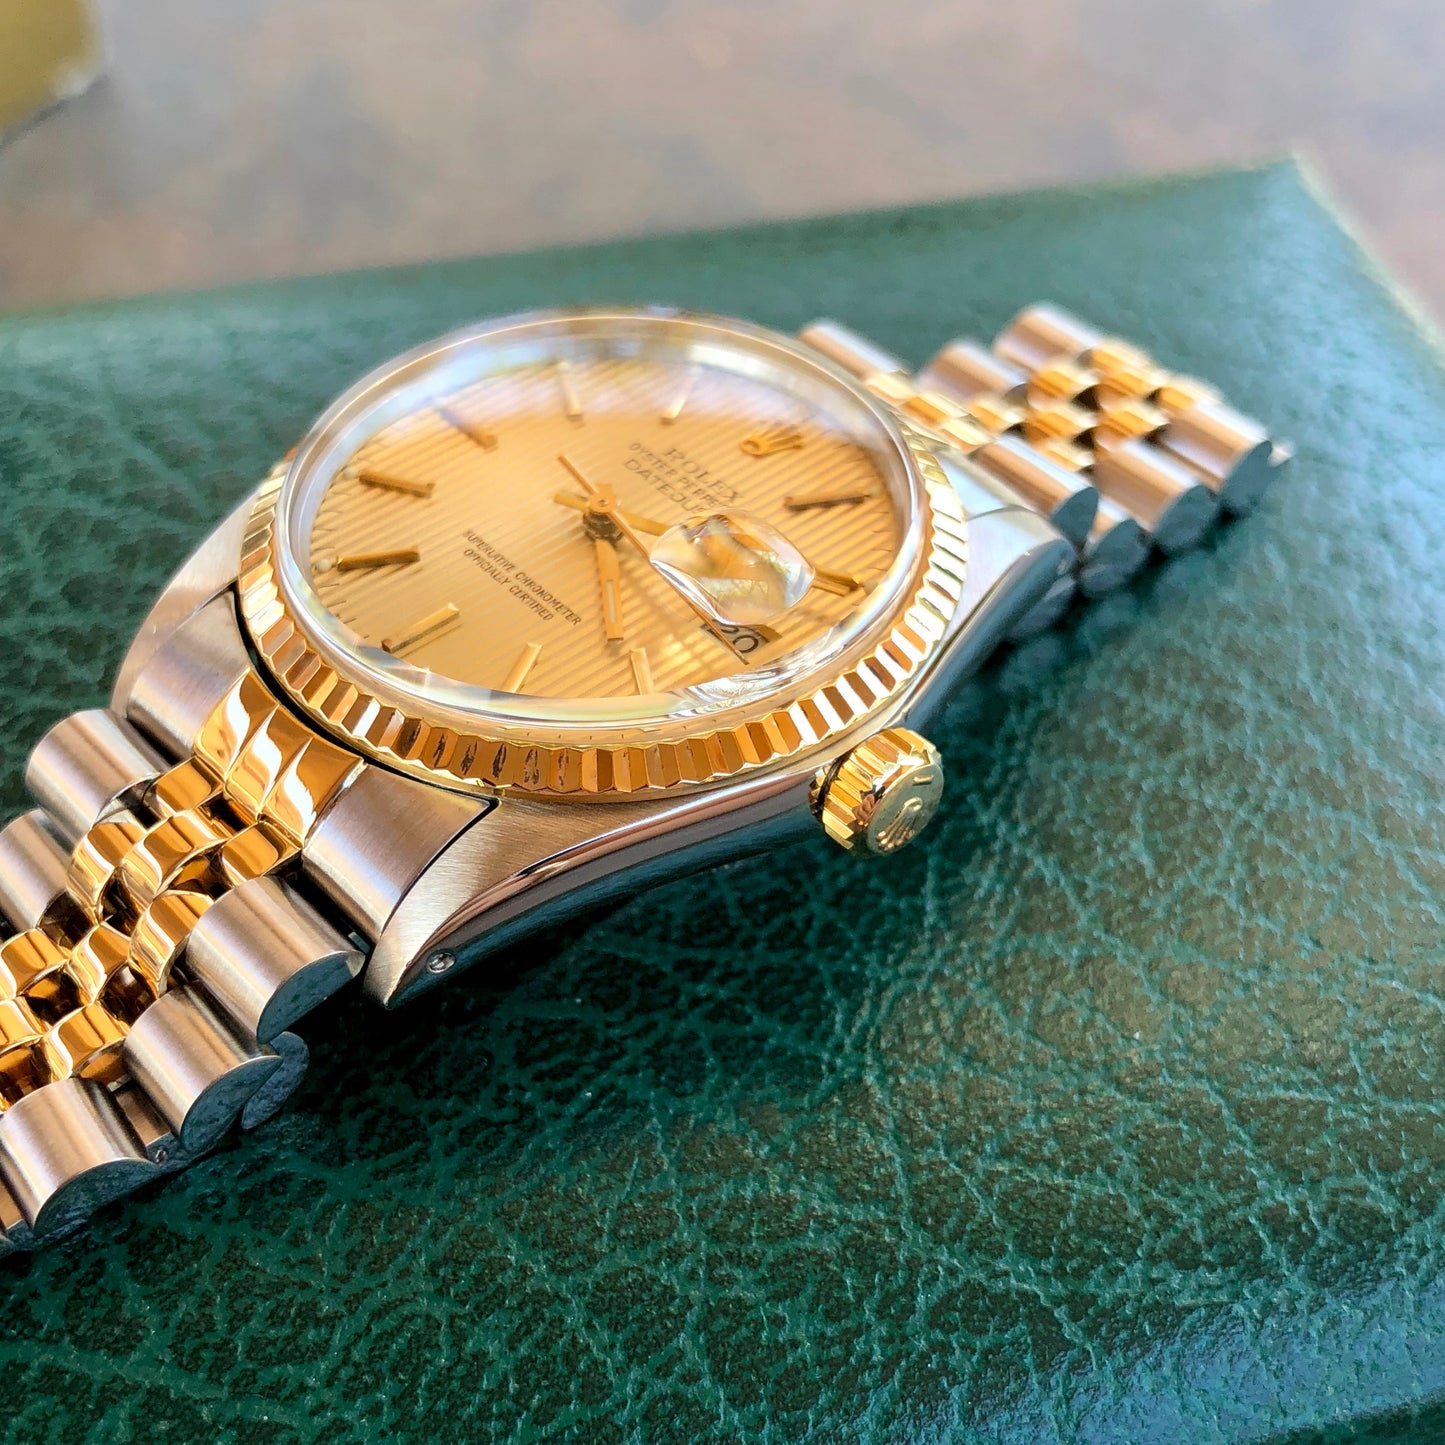 Vintage Rolex Datejust 16013 Champagne Tapestry Cal. 3035 Oyster Perpetual Two Tone Steel Gold Wristwatch Box & Papers Circa 1985 - Hashtag Watch Company